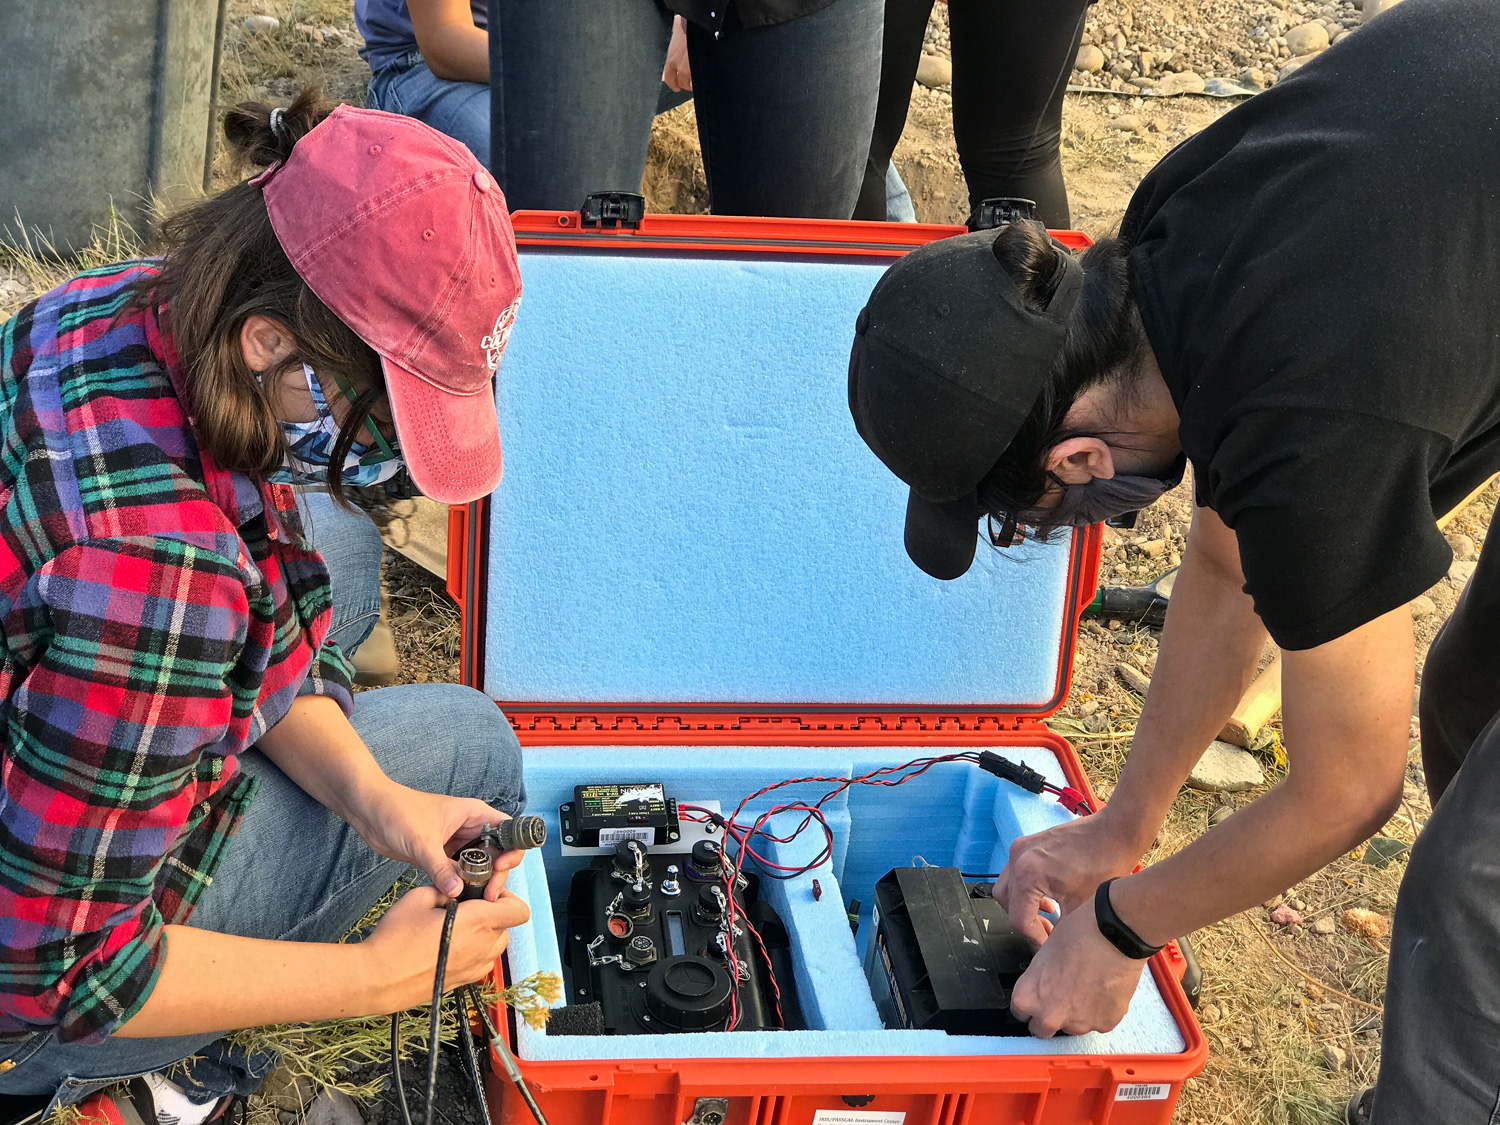 Postdoc Neala Creasy and visiting student Ridvan Orsuvan connect the solar-panel/battery-powered Reftek RT130 digitizer to the seismometer feed cable. Photo credit: Ebru Bozdag.